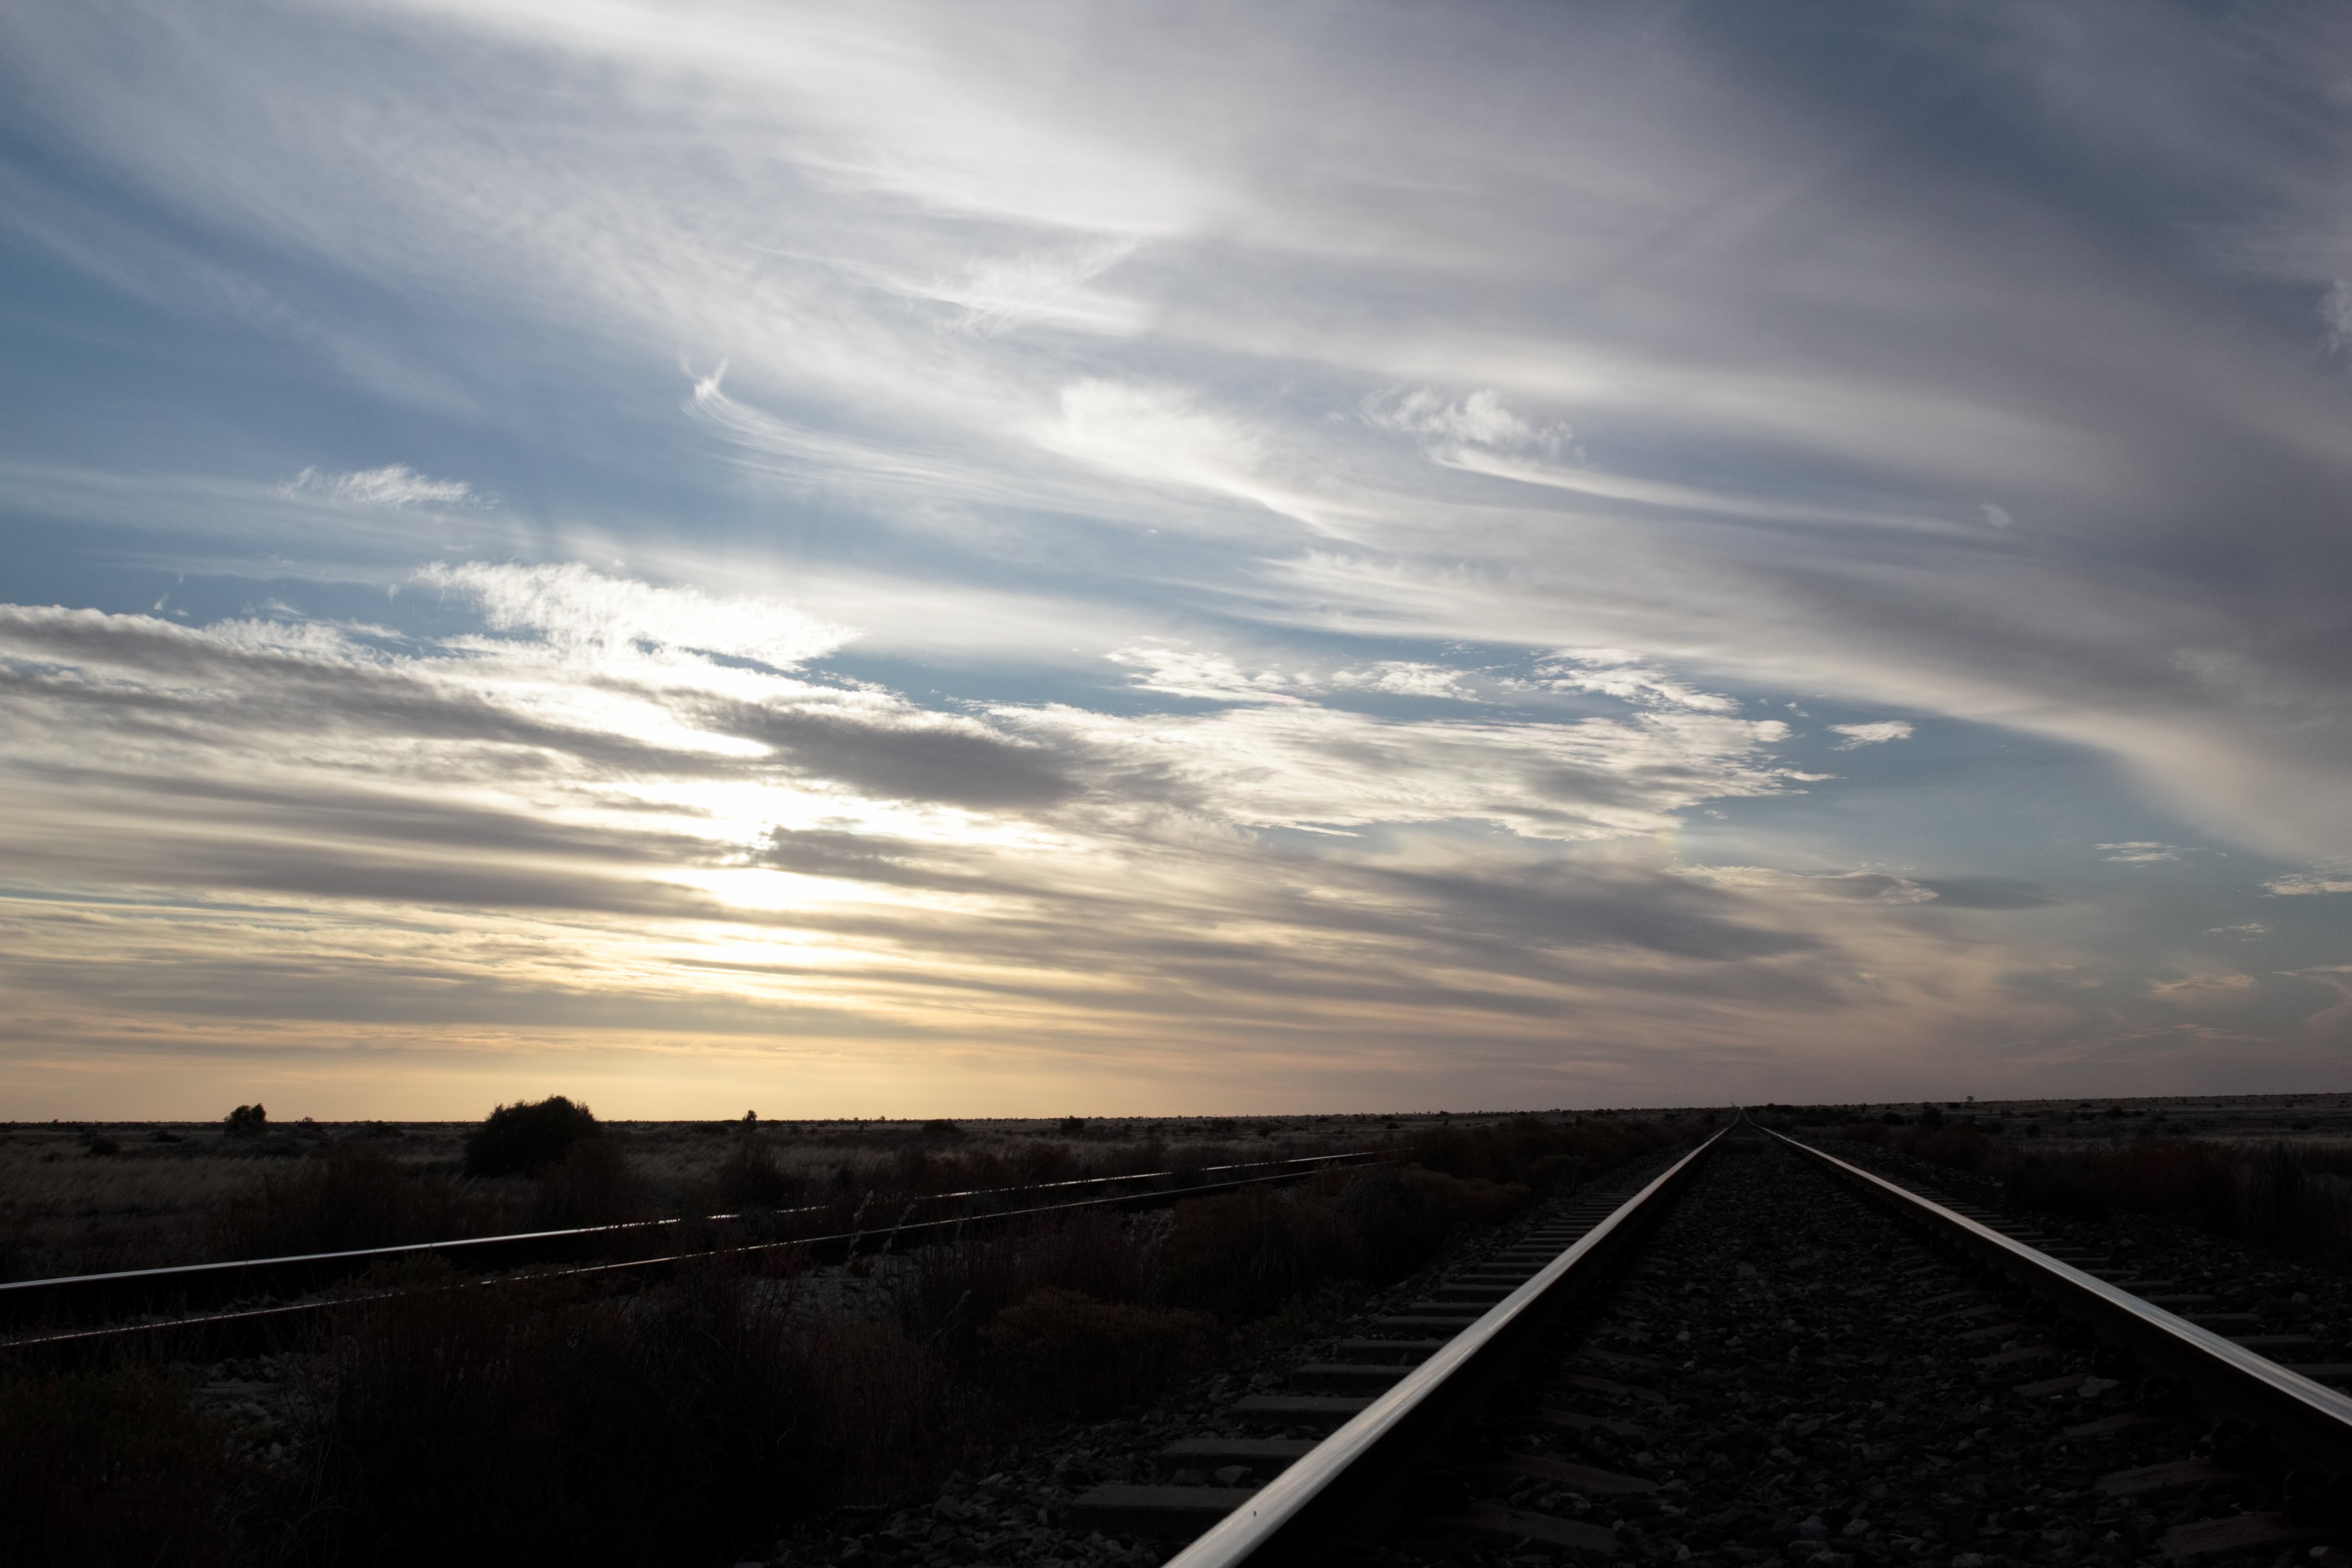 Sky full of smooth cloud over railway lines